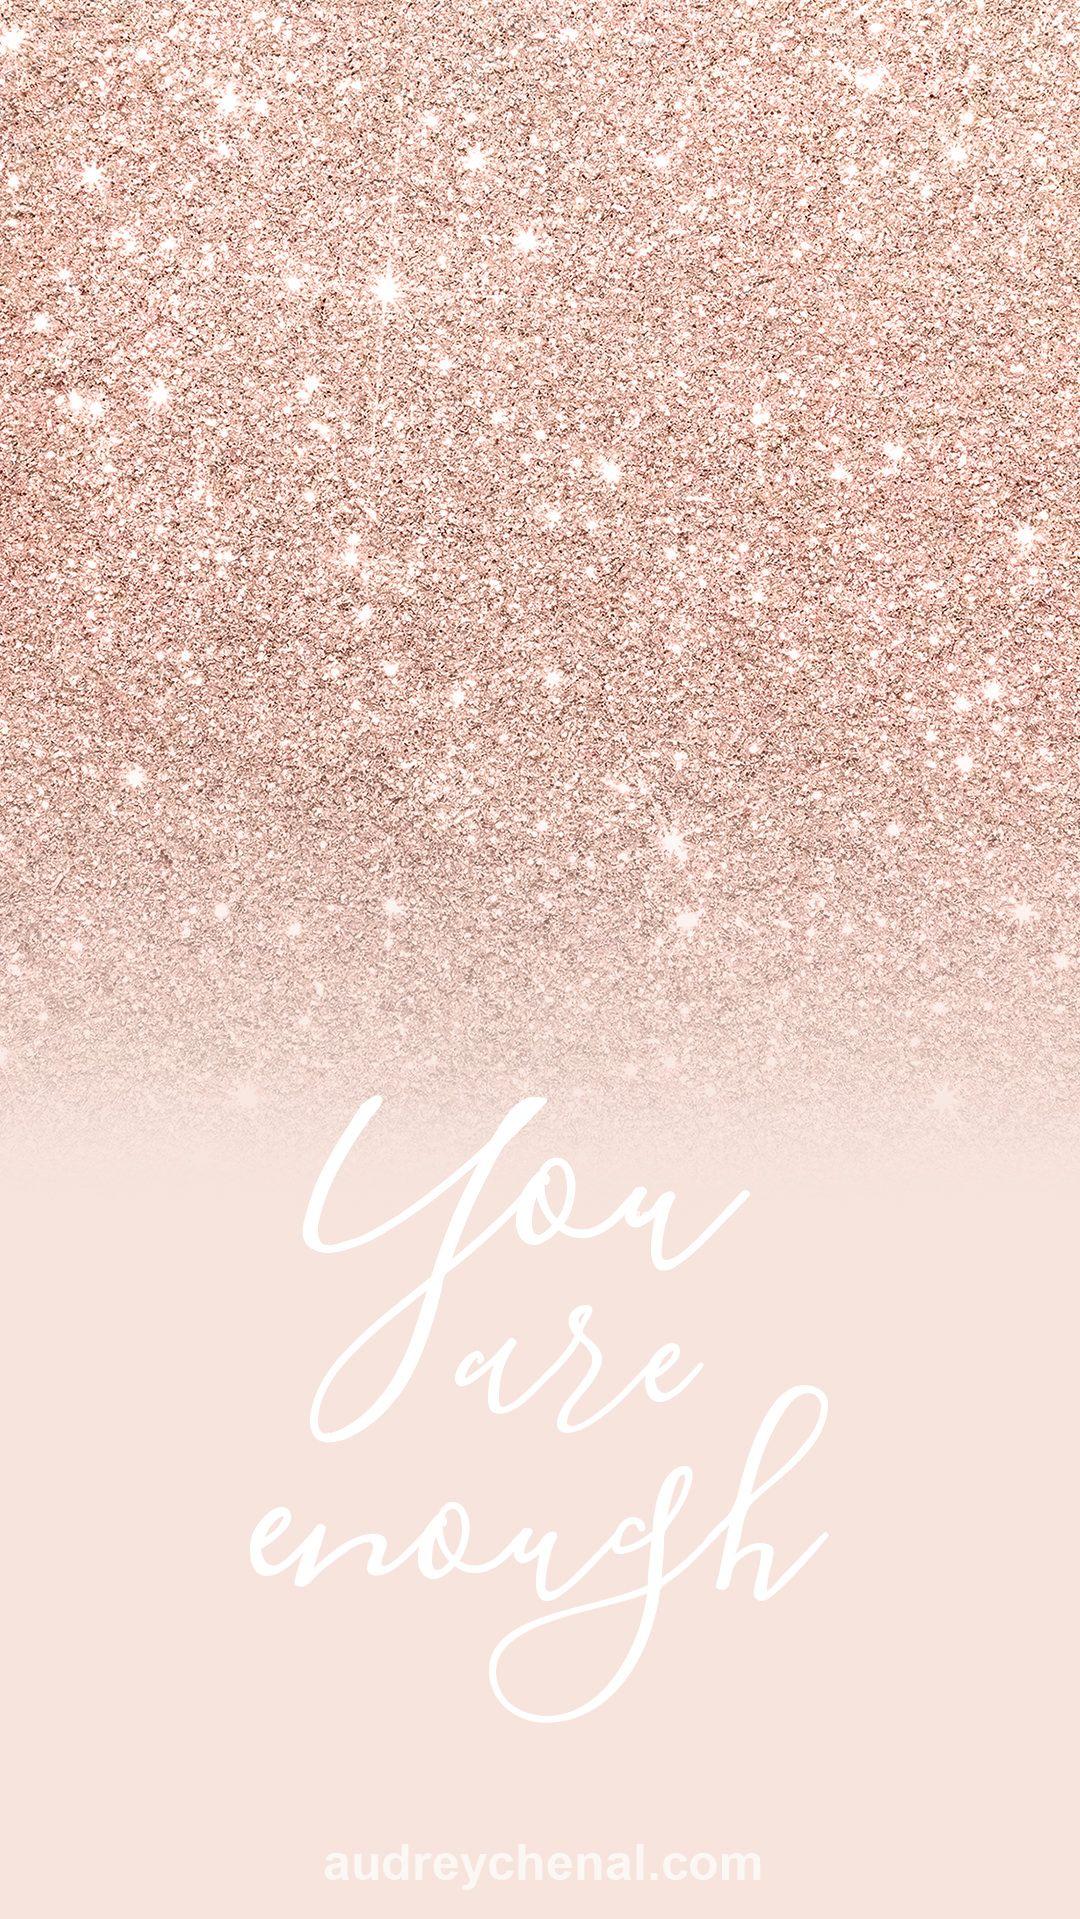 Modern Girly iPhone Wallpaper Background Gold